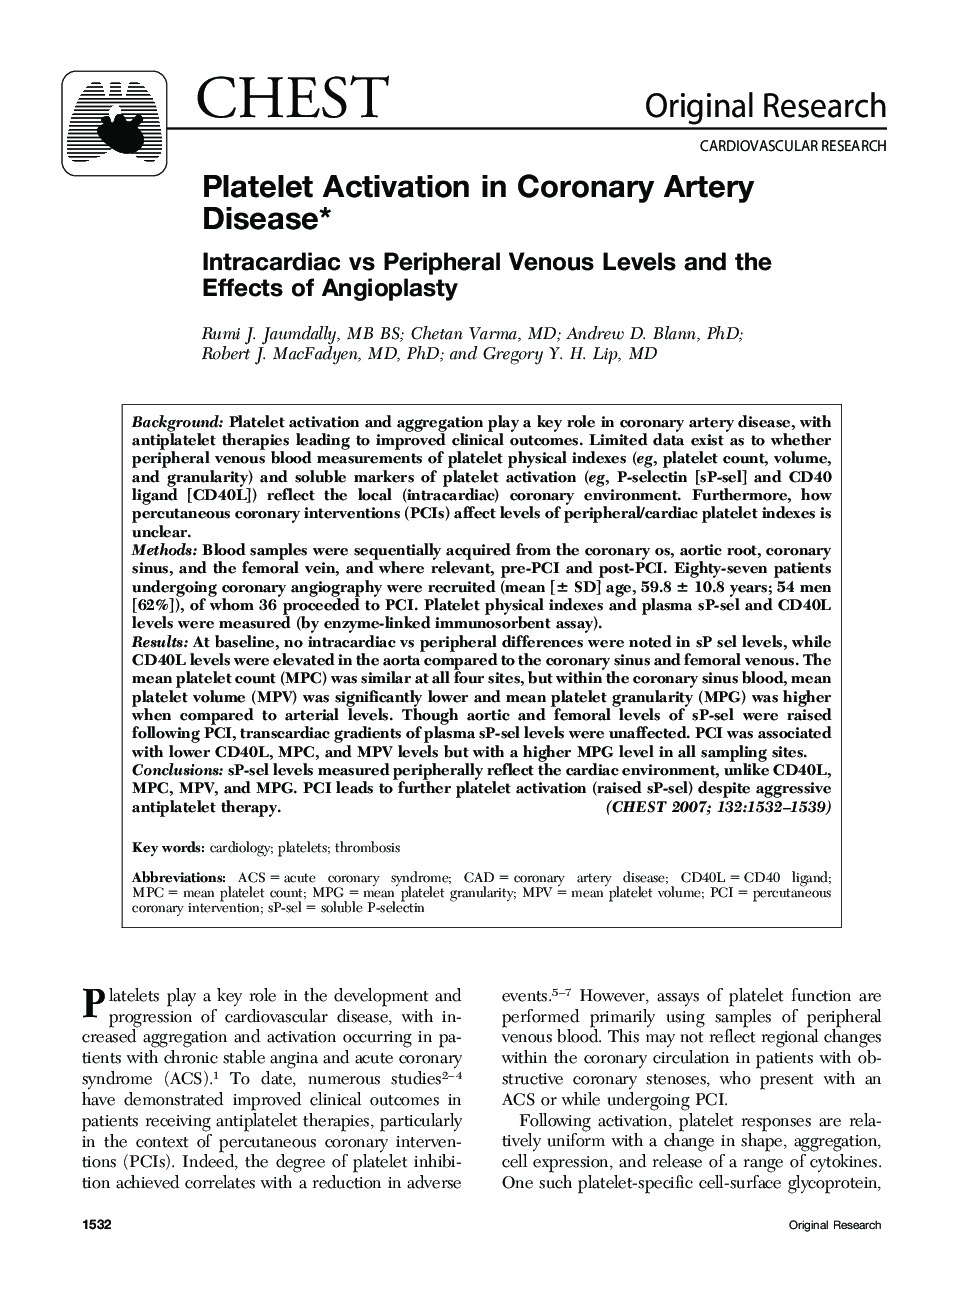 Platelet Activation in Coronary Artery Disease : Intracardiac vs Peripheral Venous Levels and the Effects of Angioplasty